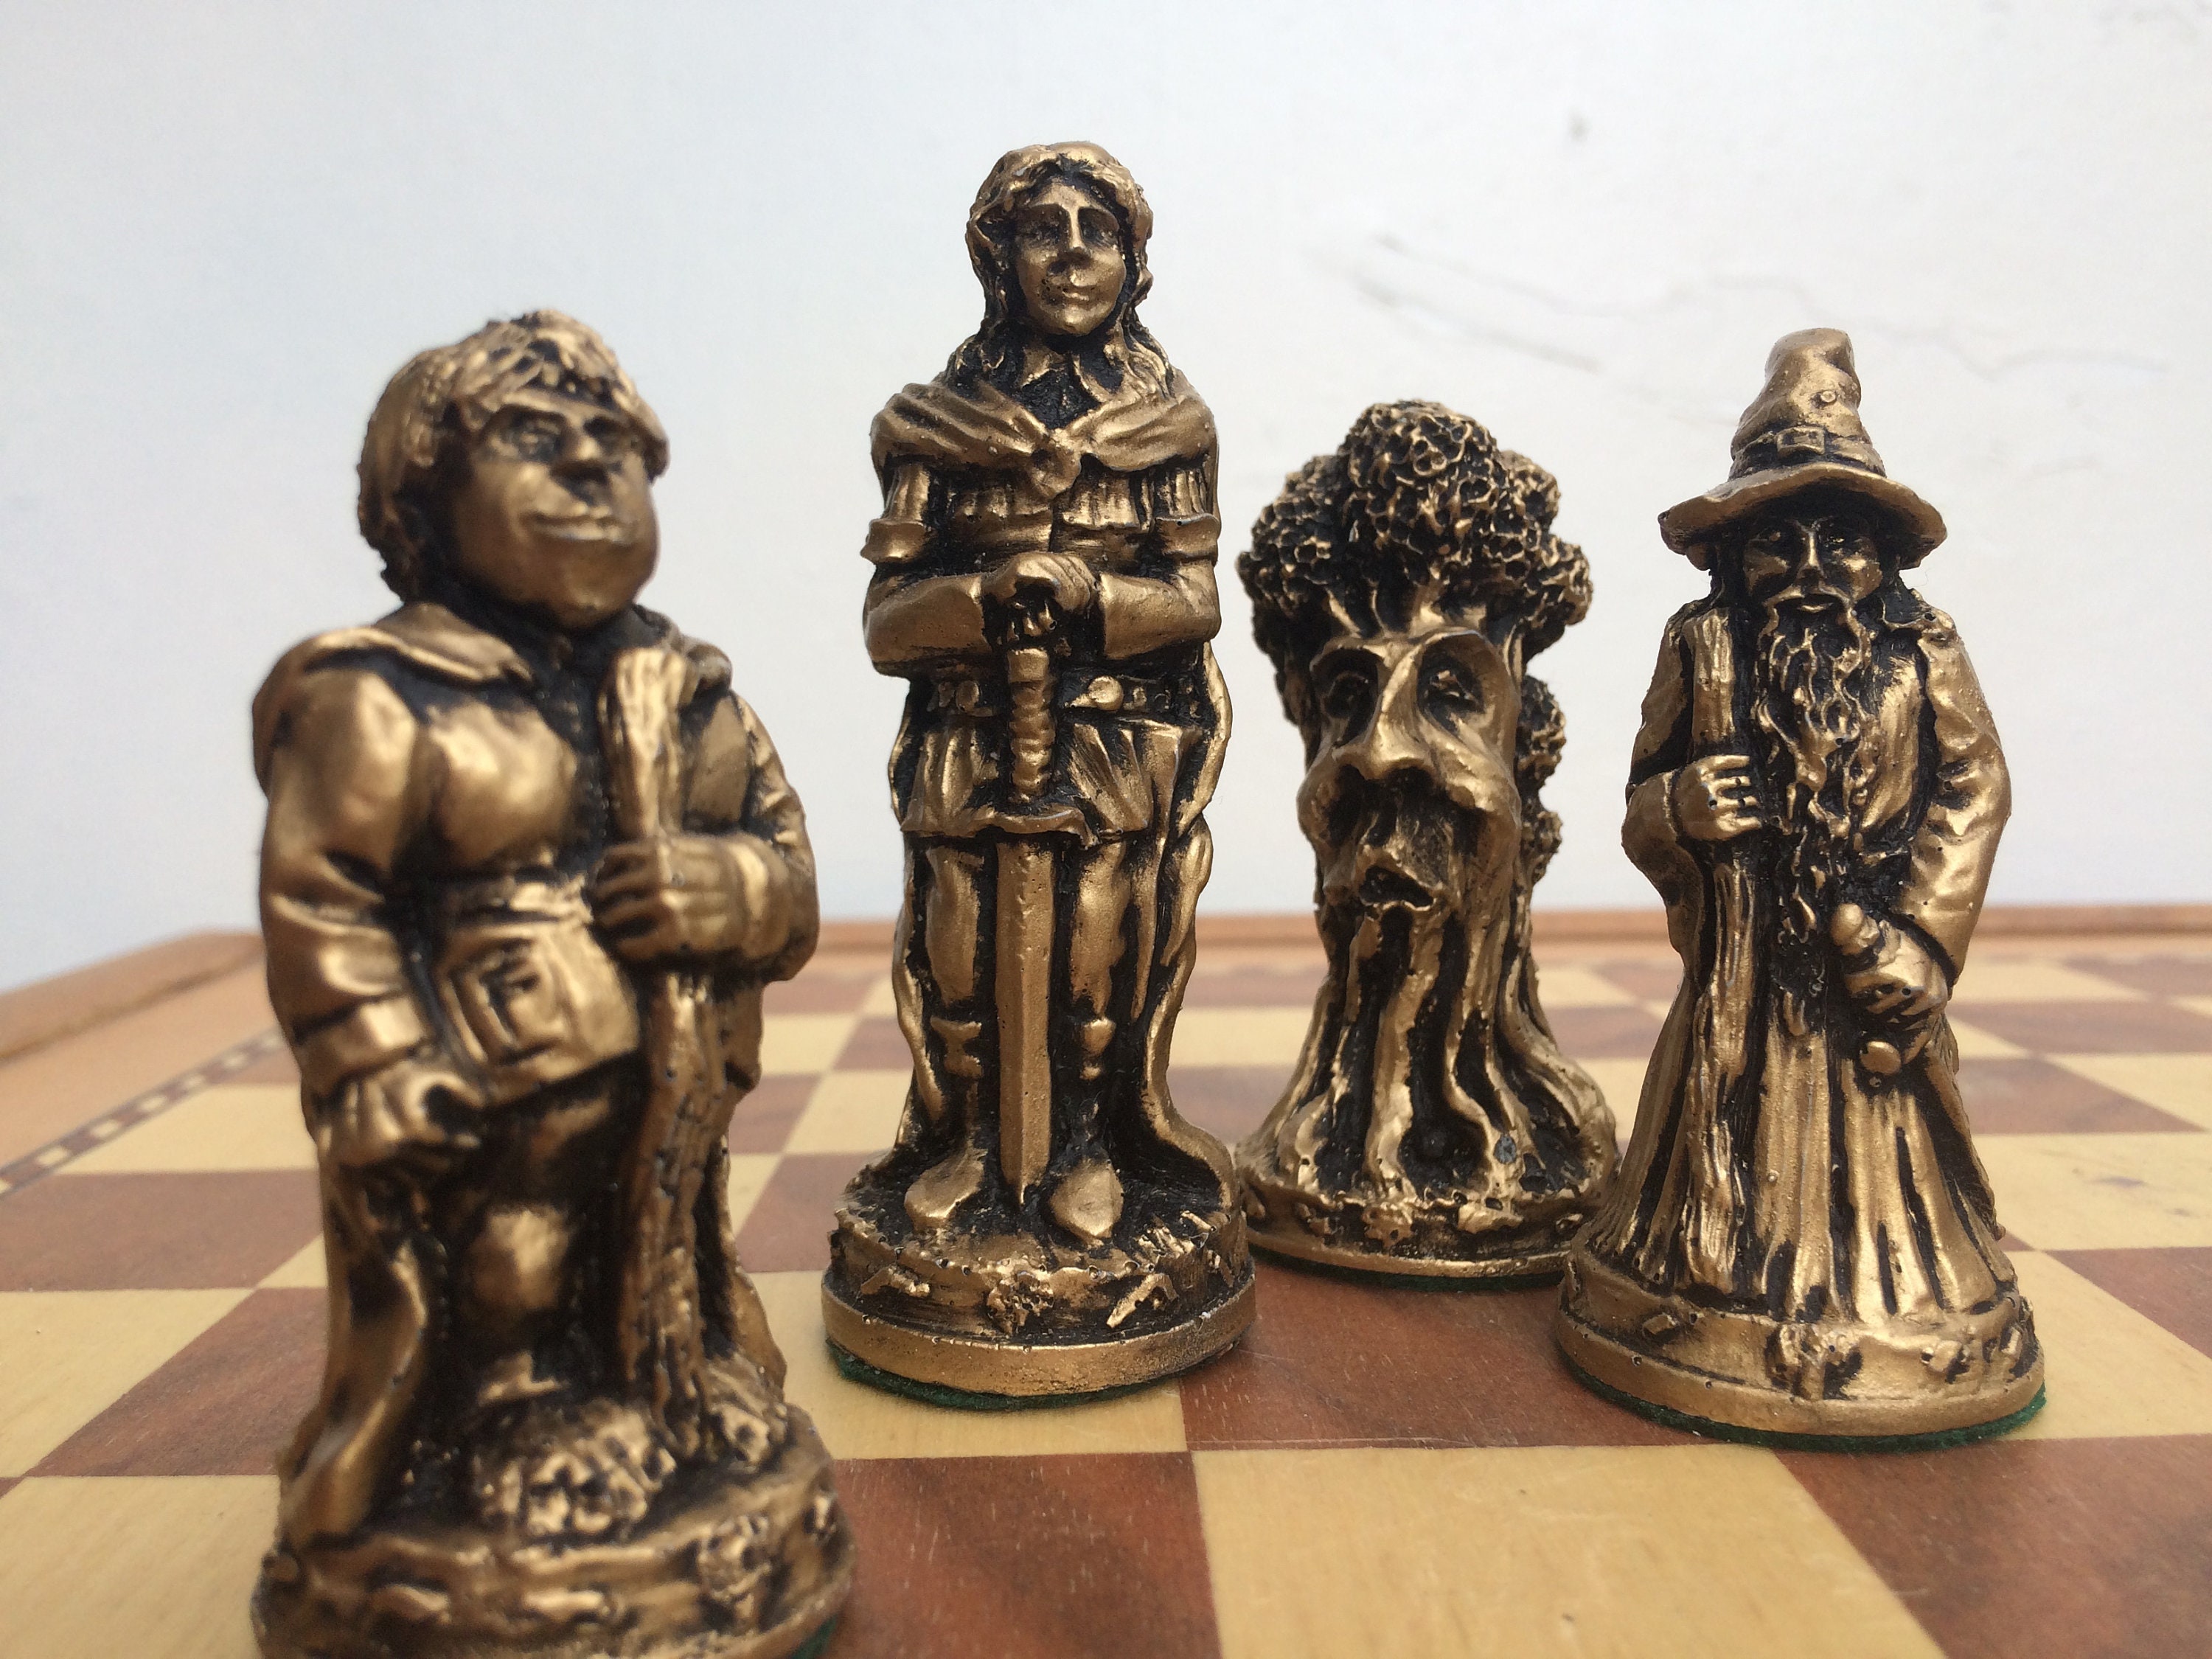 Lord of the Rings Chess Set - LOTR Themed Chess Pieces in Gold and